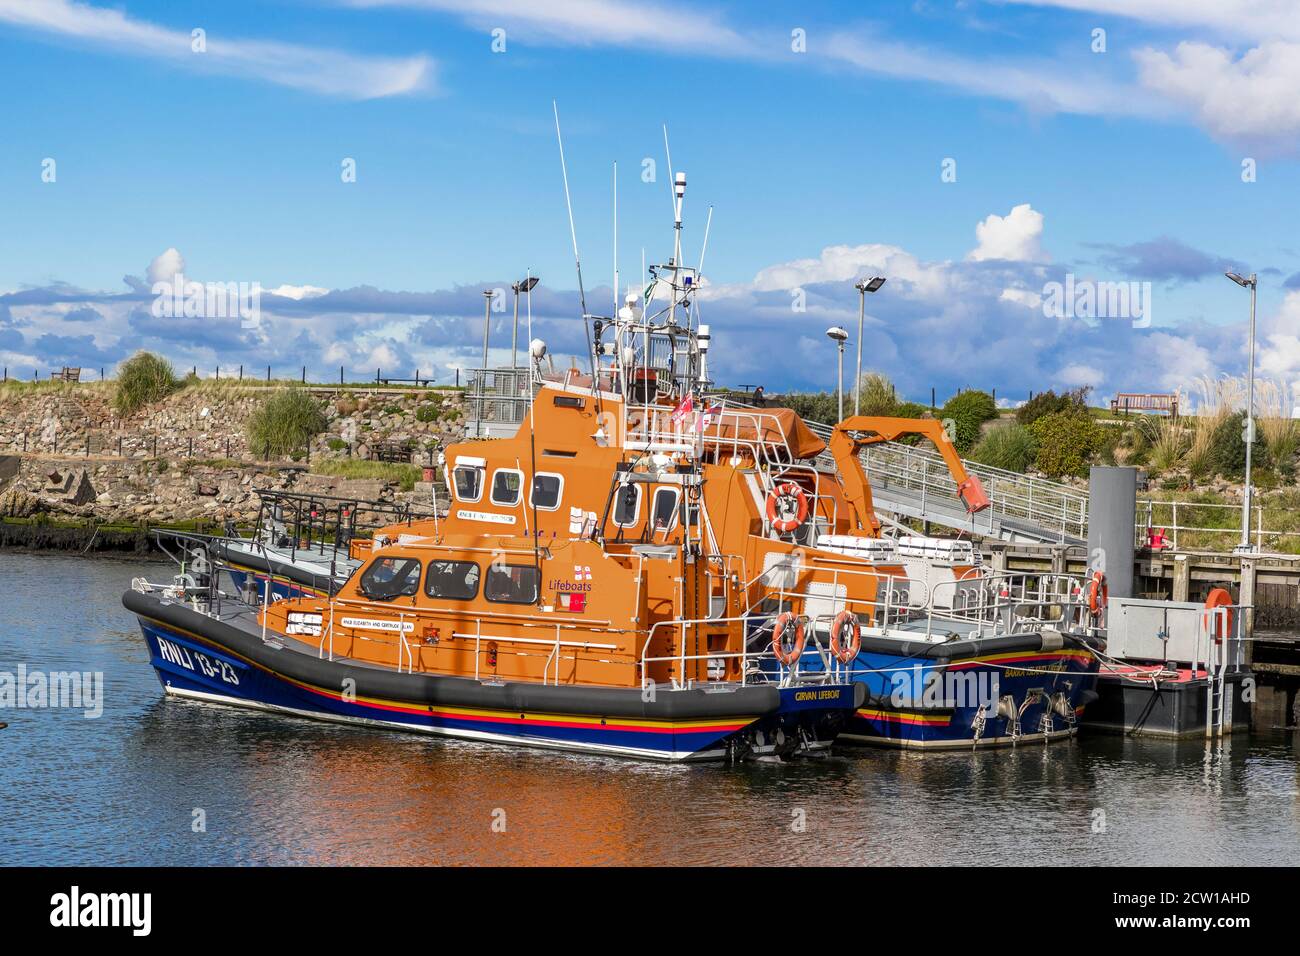 Two RNLI lifeboats, the Girvan lifeboat and the Barra Island lifeboat, tied up at Girvan harbour, Girvan, Ayrshire, Scotland, UK on the Firth of Clyde Stock Photo